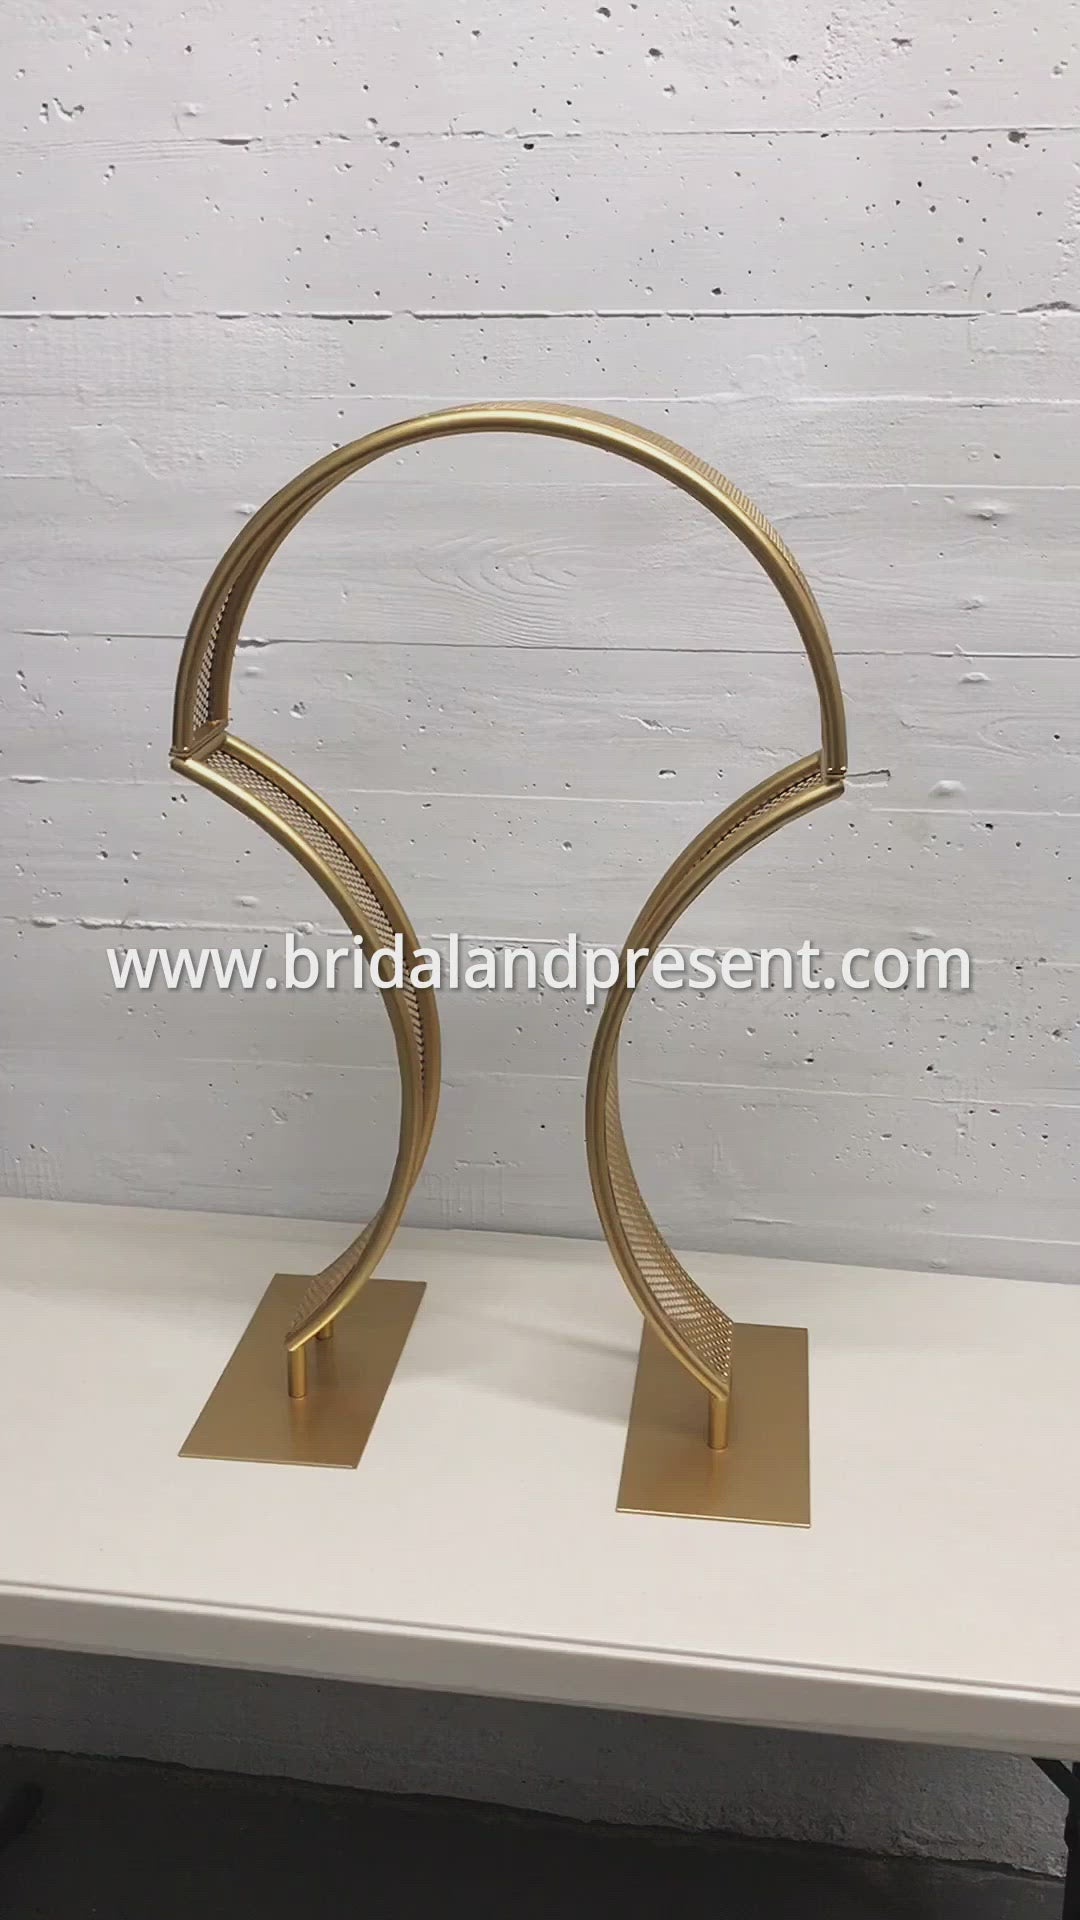 Shiny Gold Sturdy flower stand for wedding is perfect for wedding table arrangements. Inspired by wedding centerpiece ideas, DIY wedding centerpieces for round tables by using our tall gold centerpieces, flower column stands and boho wedding centerpieces at bridal shower, wedding reception, rehearsal dinner parties, and events.